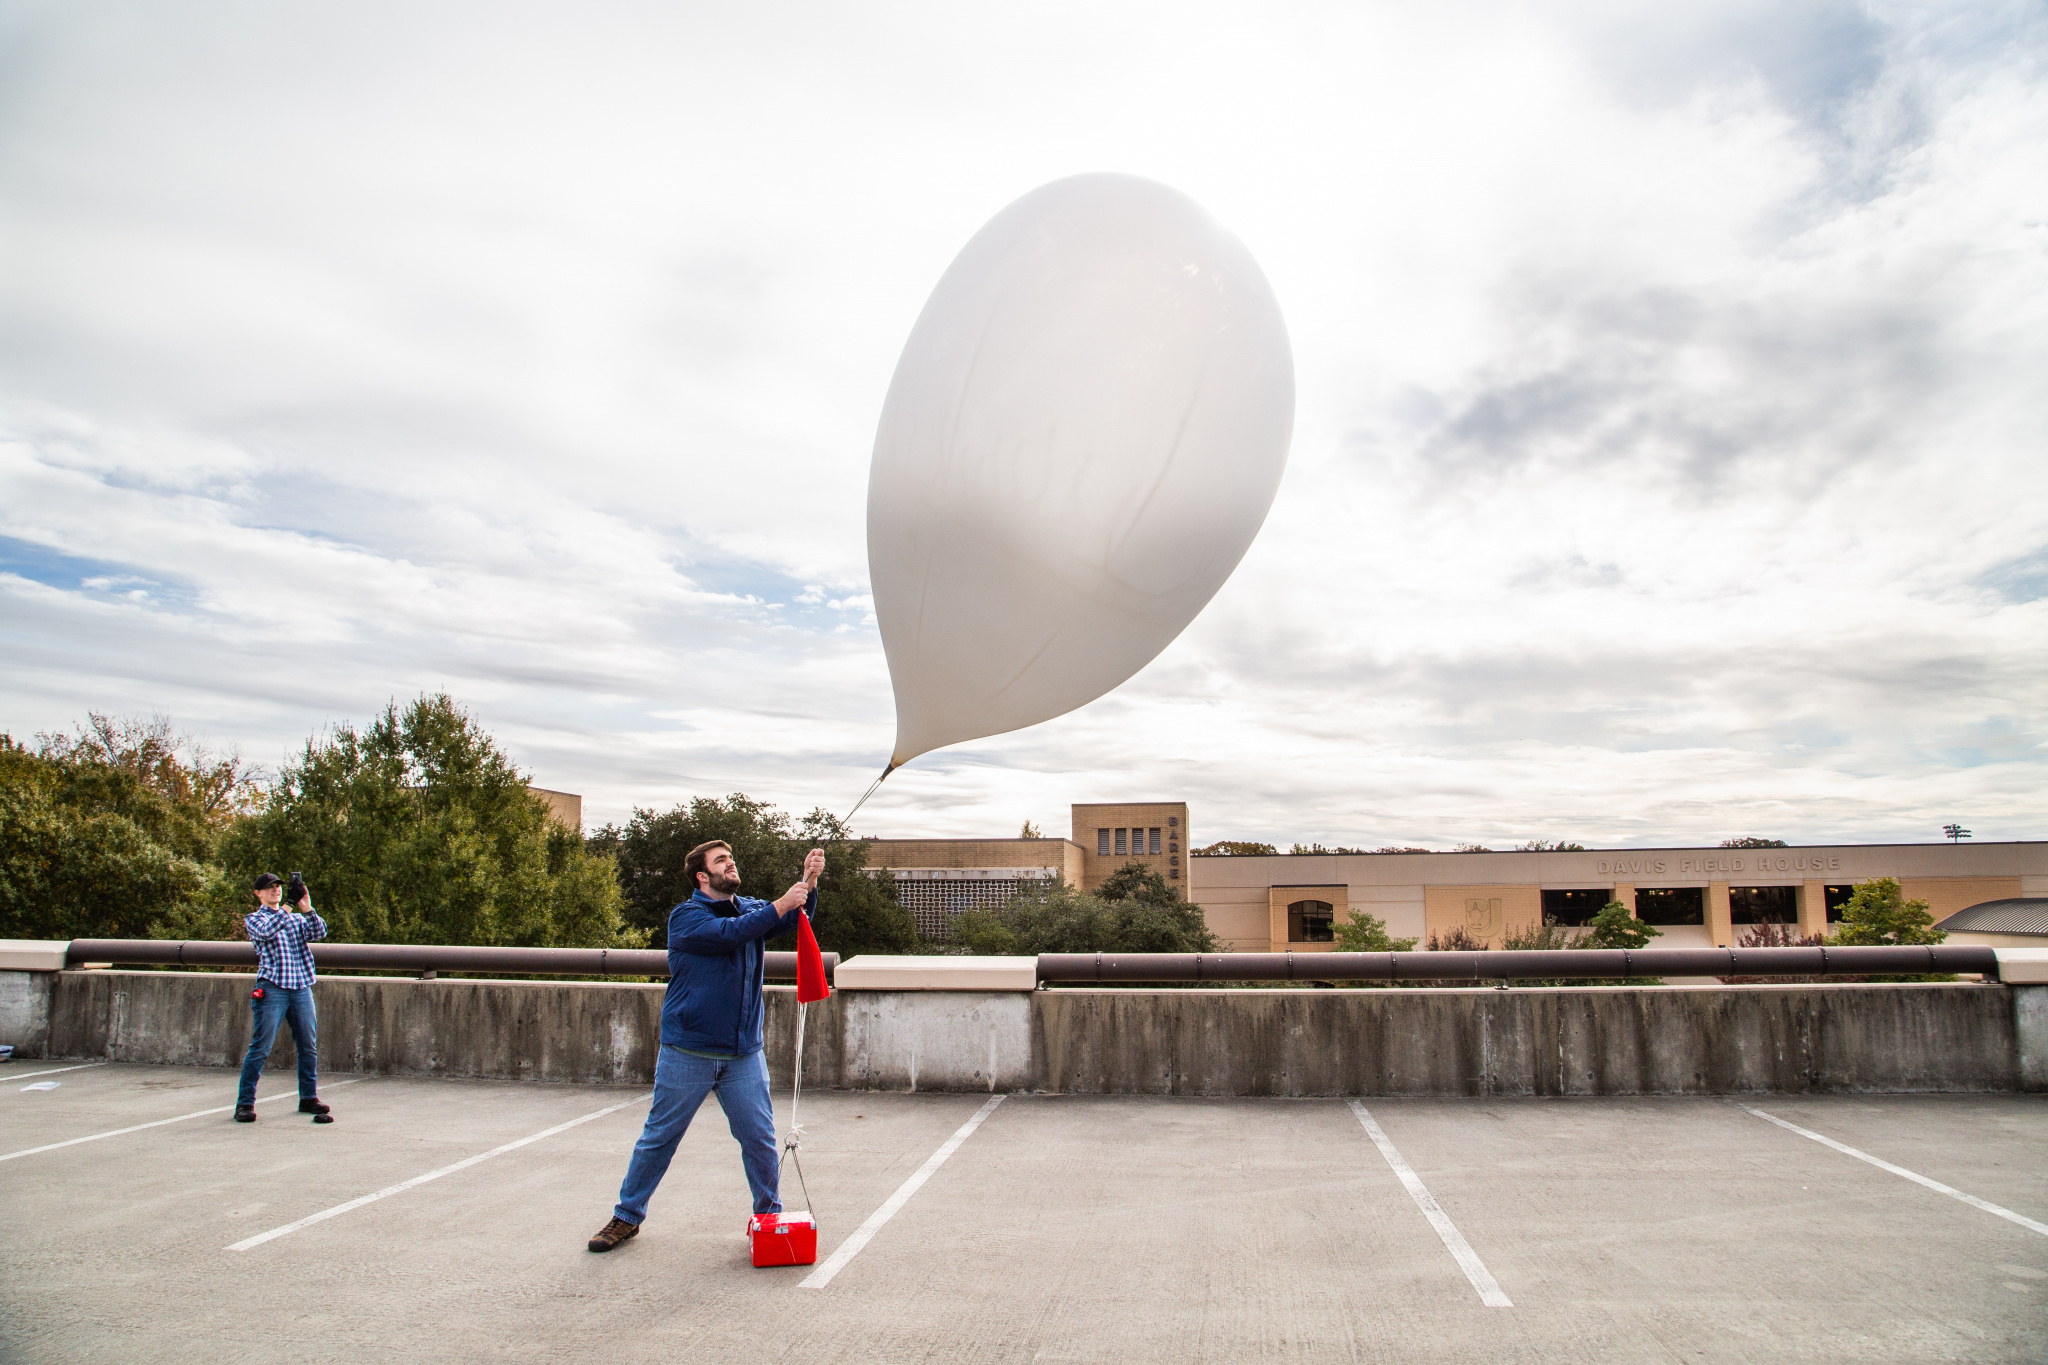 A freshman engineering student holds a weather balloon on the top of the parking garage